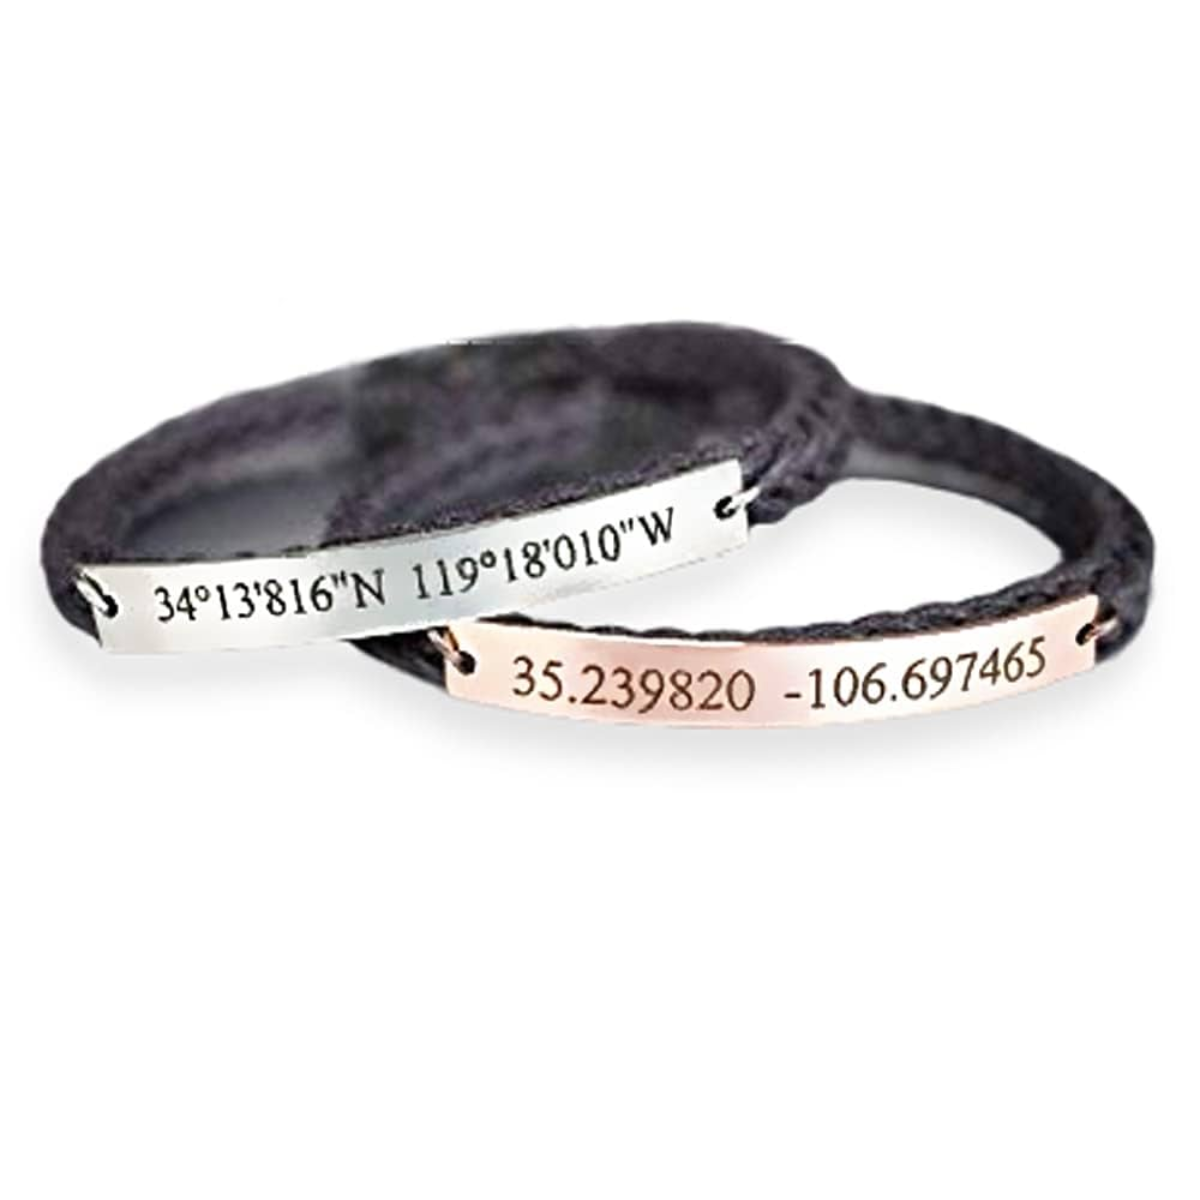 30. Personalized Coordinates Bracelet: A Unique and Thoughtful Anniversary Gift